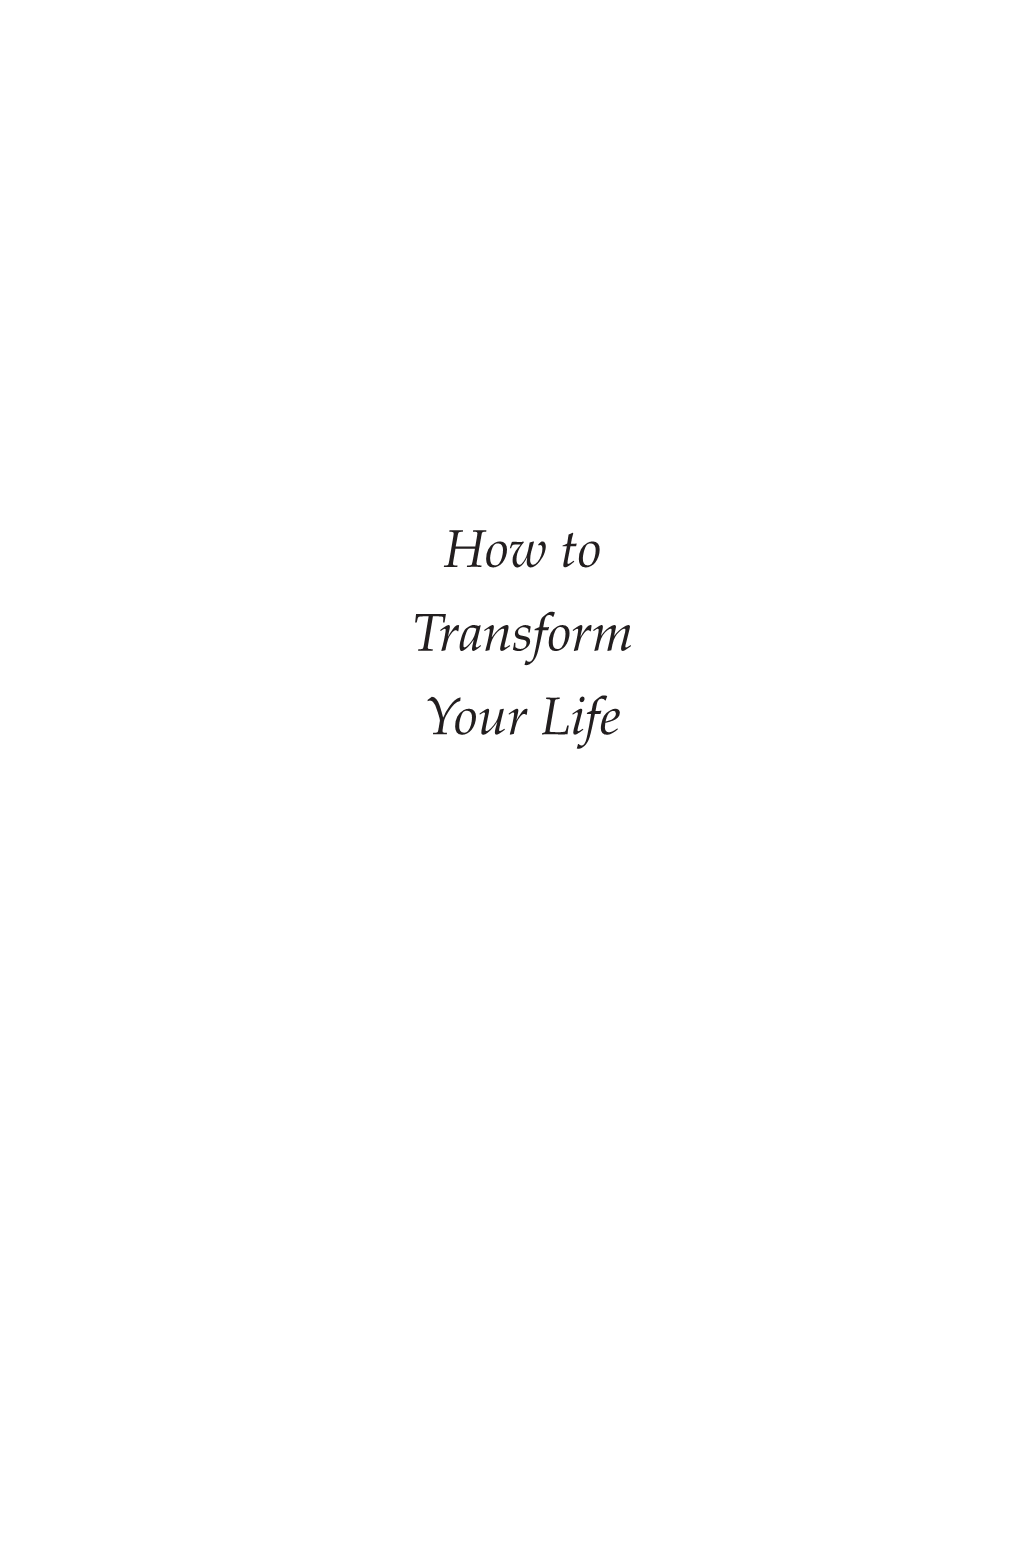 How to Transform Your Life Suggested Study Or Reading Order of Books by Venerable Geshe Kelsang Gyatso Rinpoche